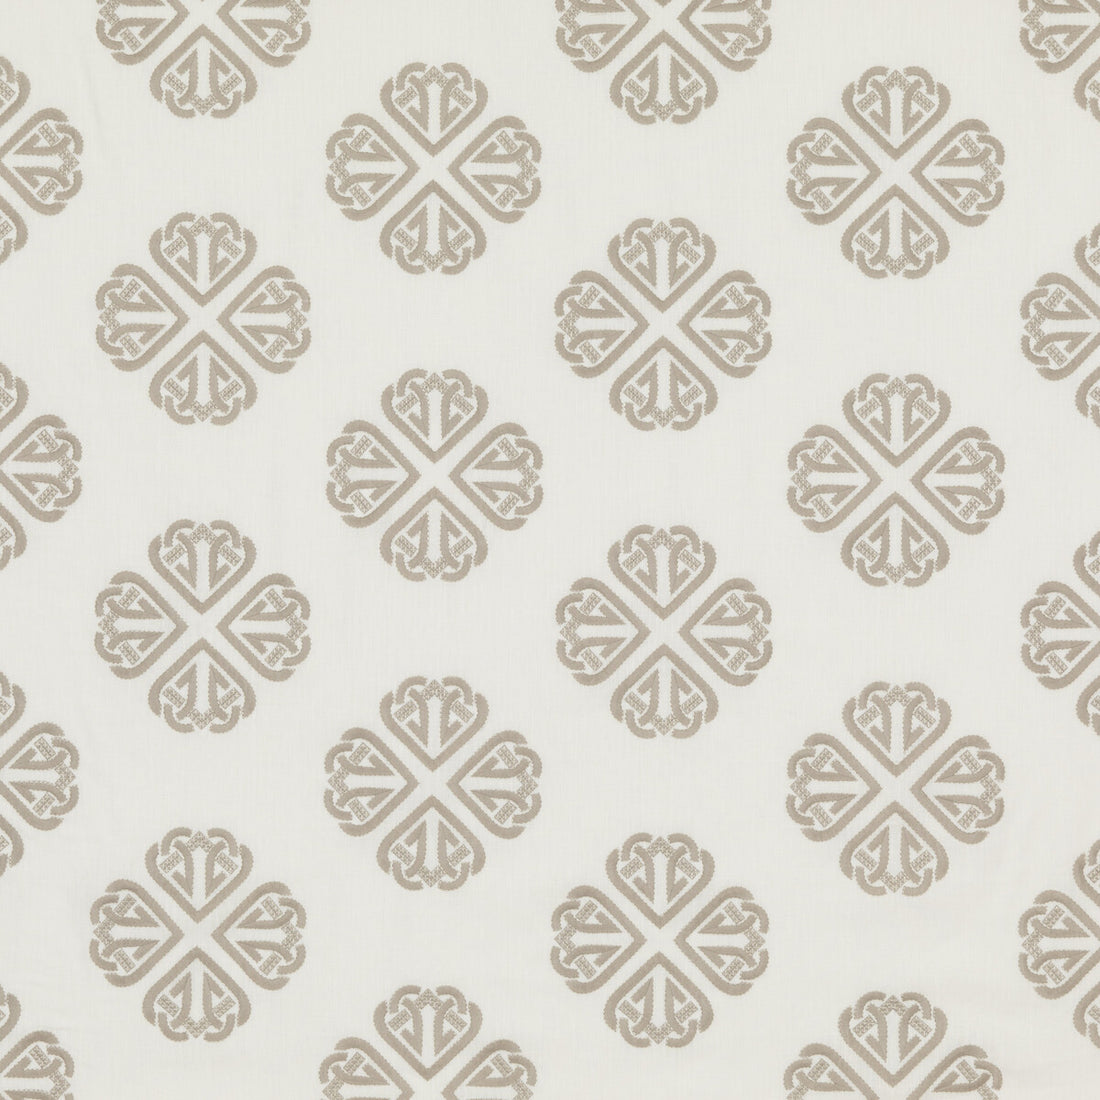 Kersloe fabric in ivory/stone color - pattern BF10768.1.0 - by G P &amp; J Baker in the Keswick Embroideries collection